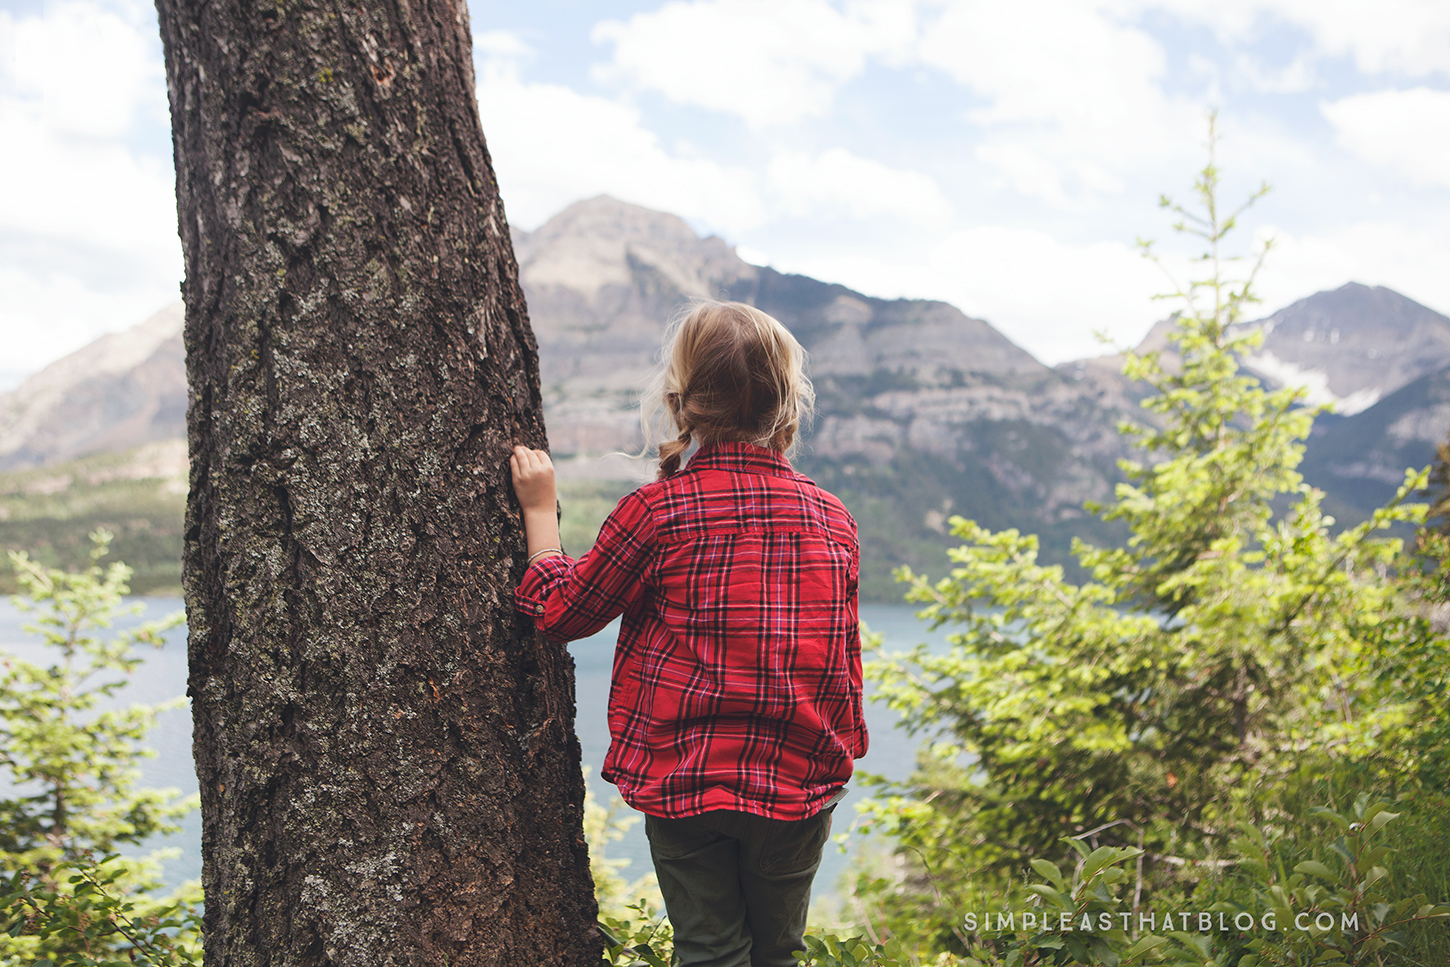 For families who would like to leap from observing to exploring, here are 6 tips to help kids EXPLORE nature with all of their senses.